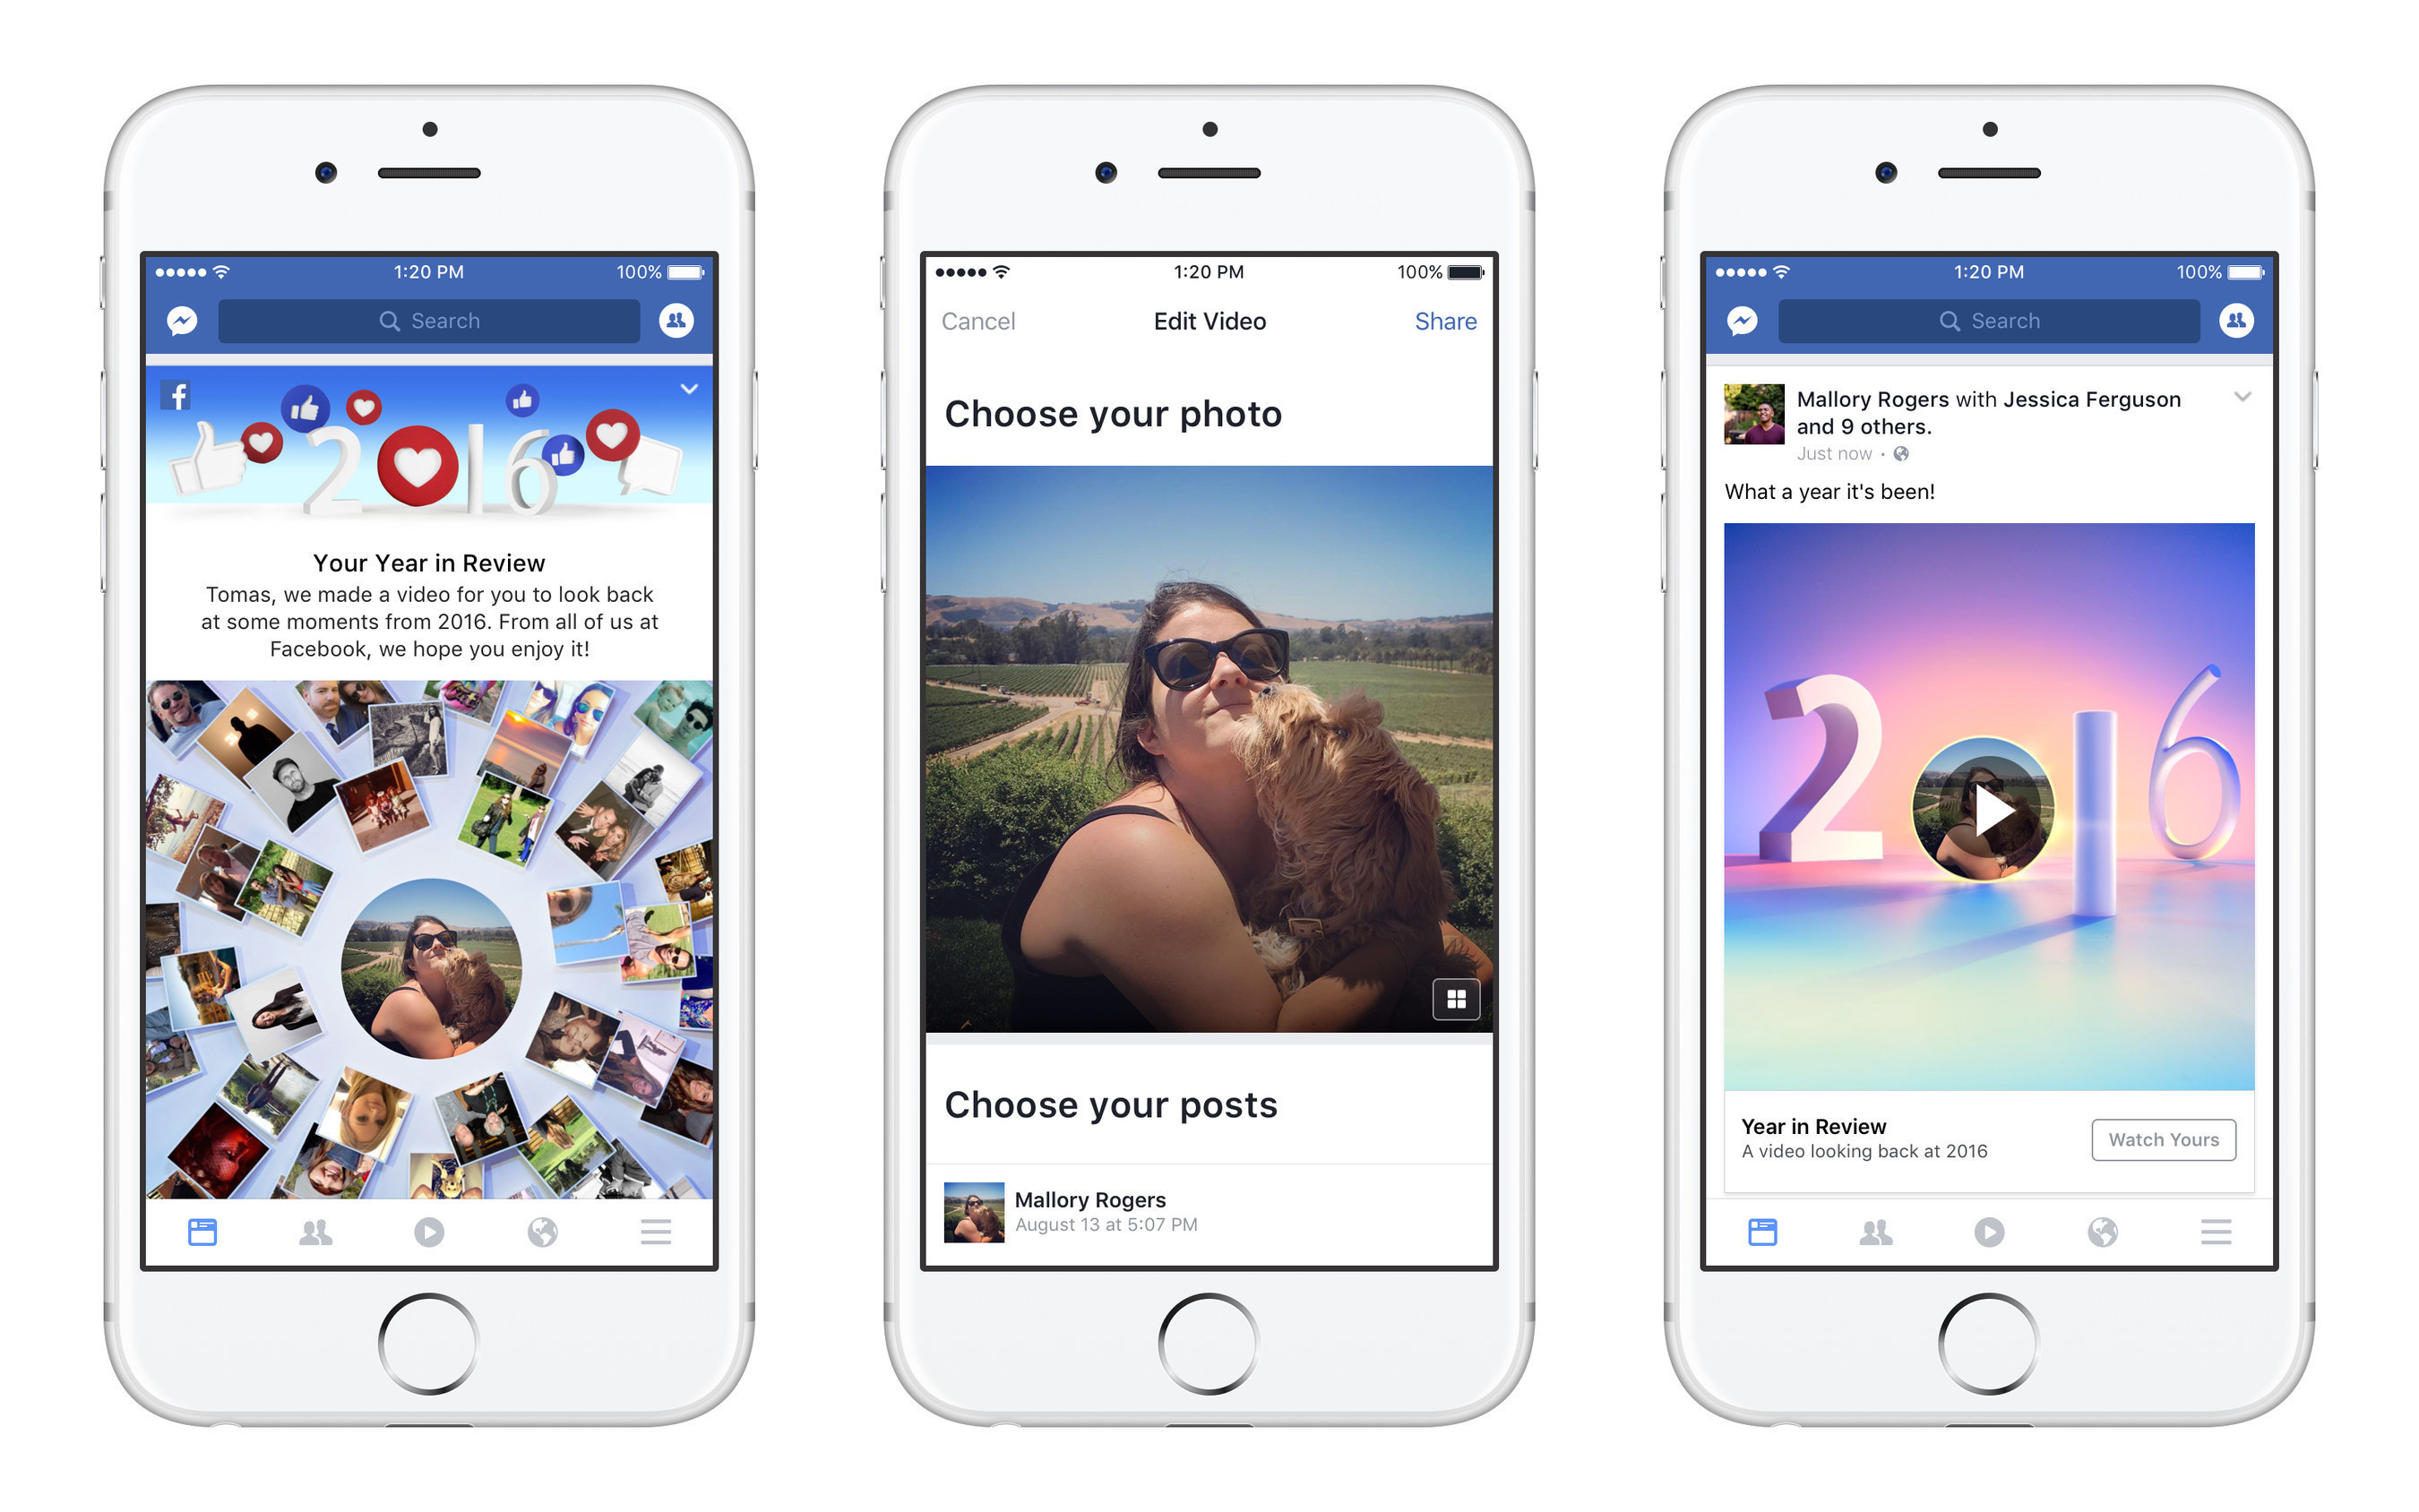 Facebook's 2016 Year in Review